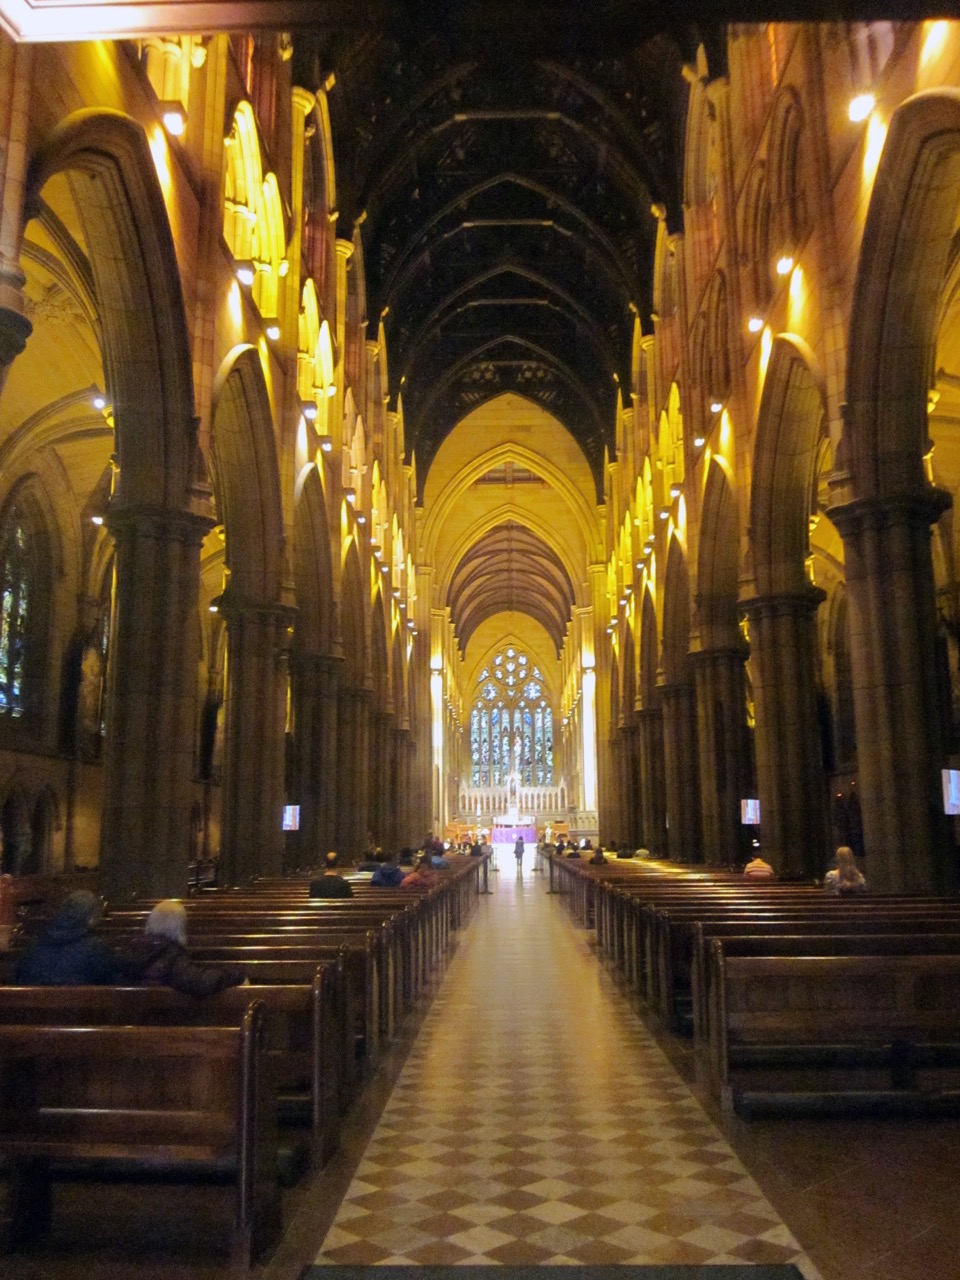 St Mary’s Cathedral, interior view